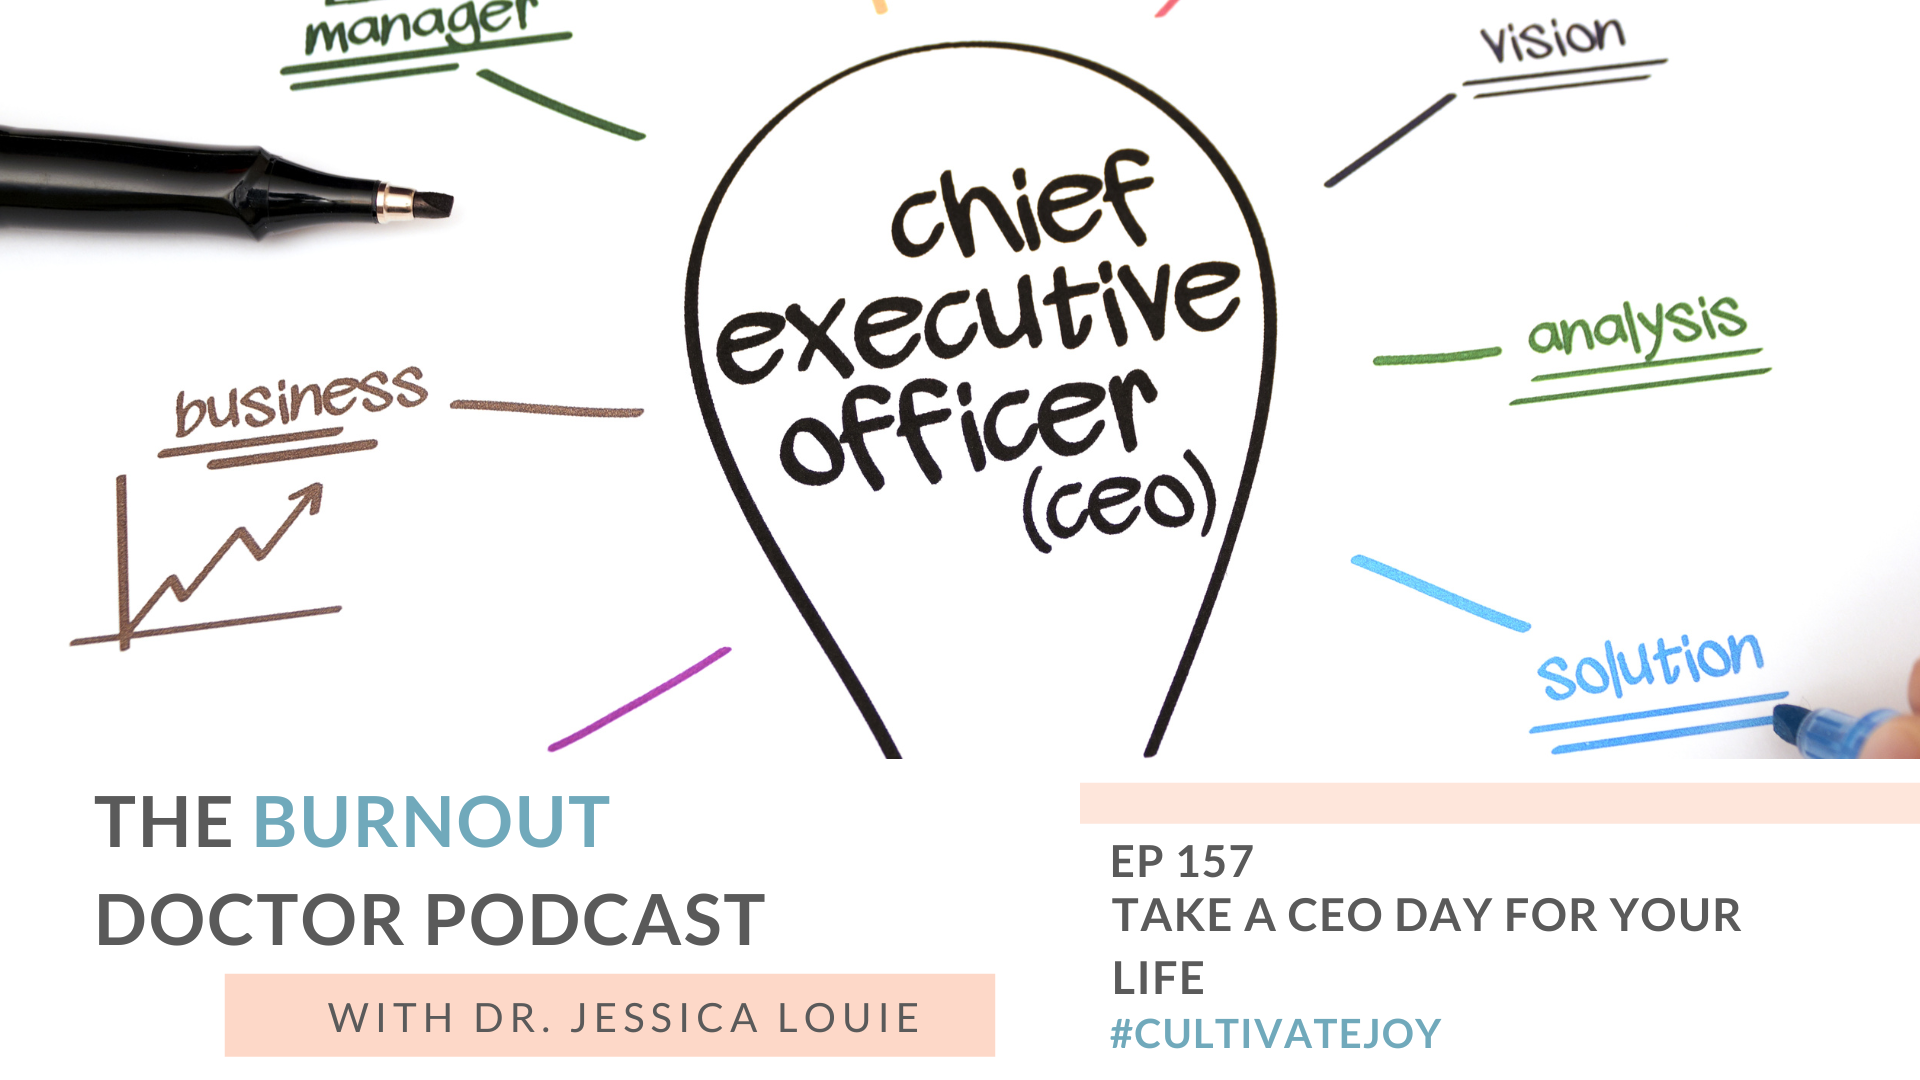 How to Take a CEO day for your life. How to be the CEO of your own life. The Burnout Doctor Podcast. Pharmacist burnout. Healthcare burnout help. Keynote speaker.